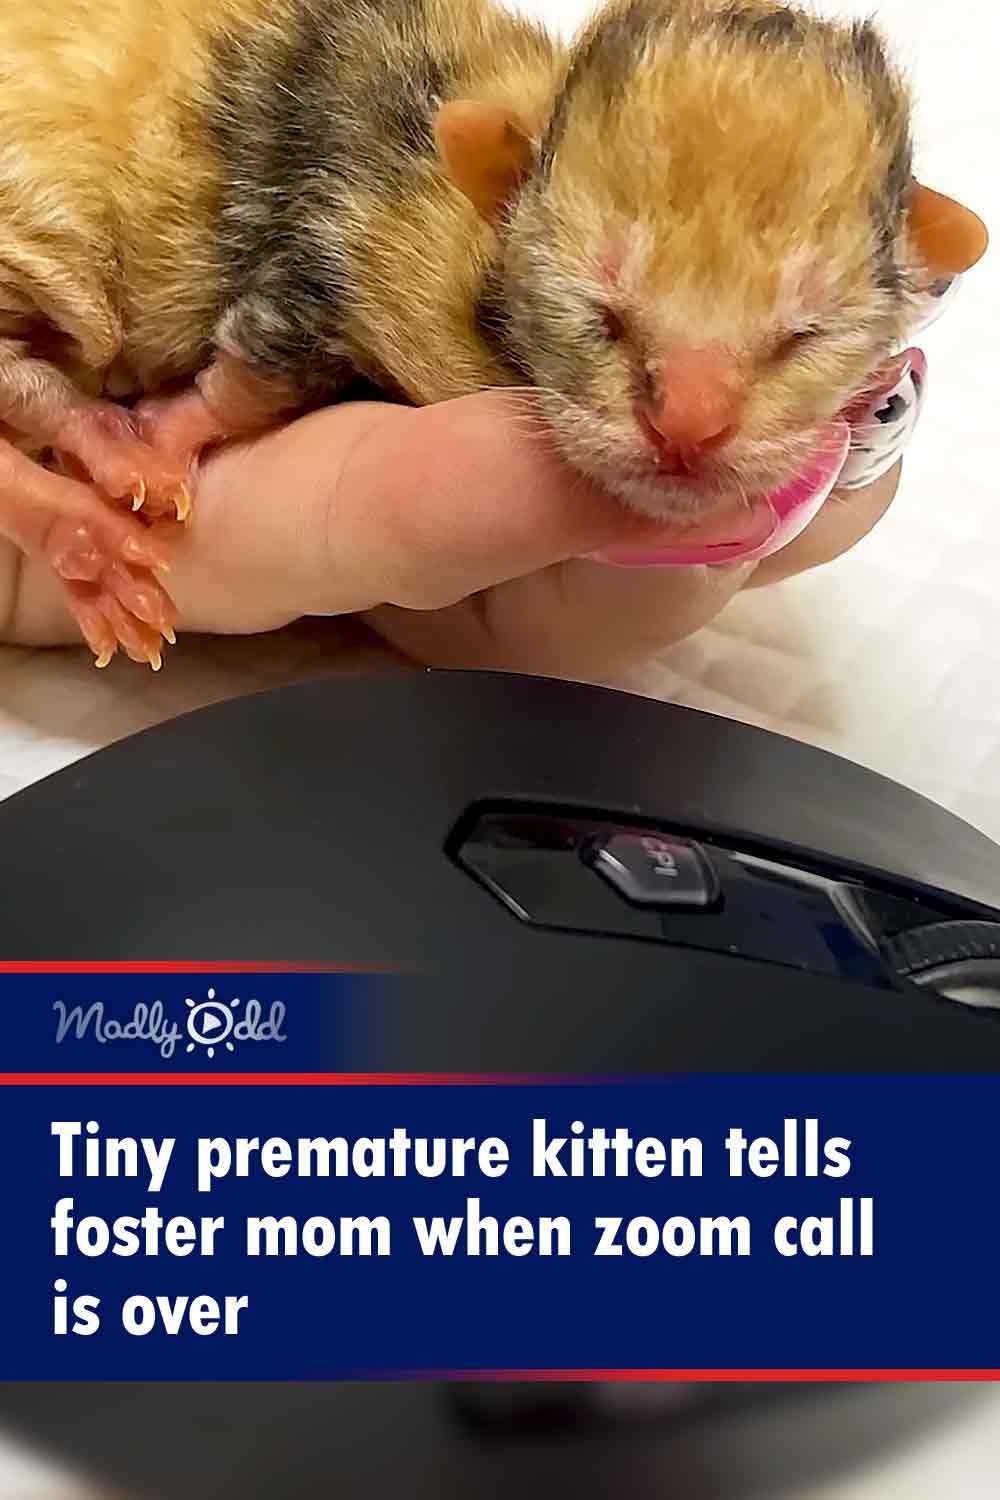 Tiny premature kitten tells foster mom when zoom call is over